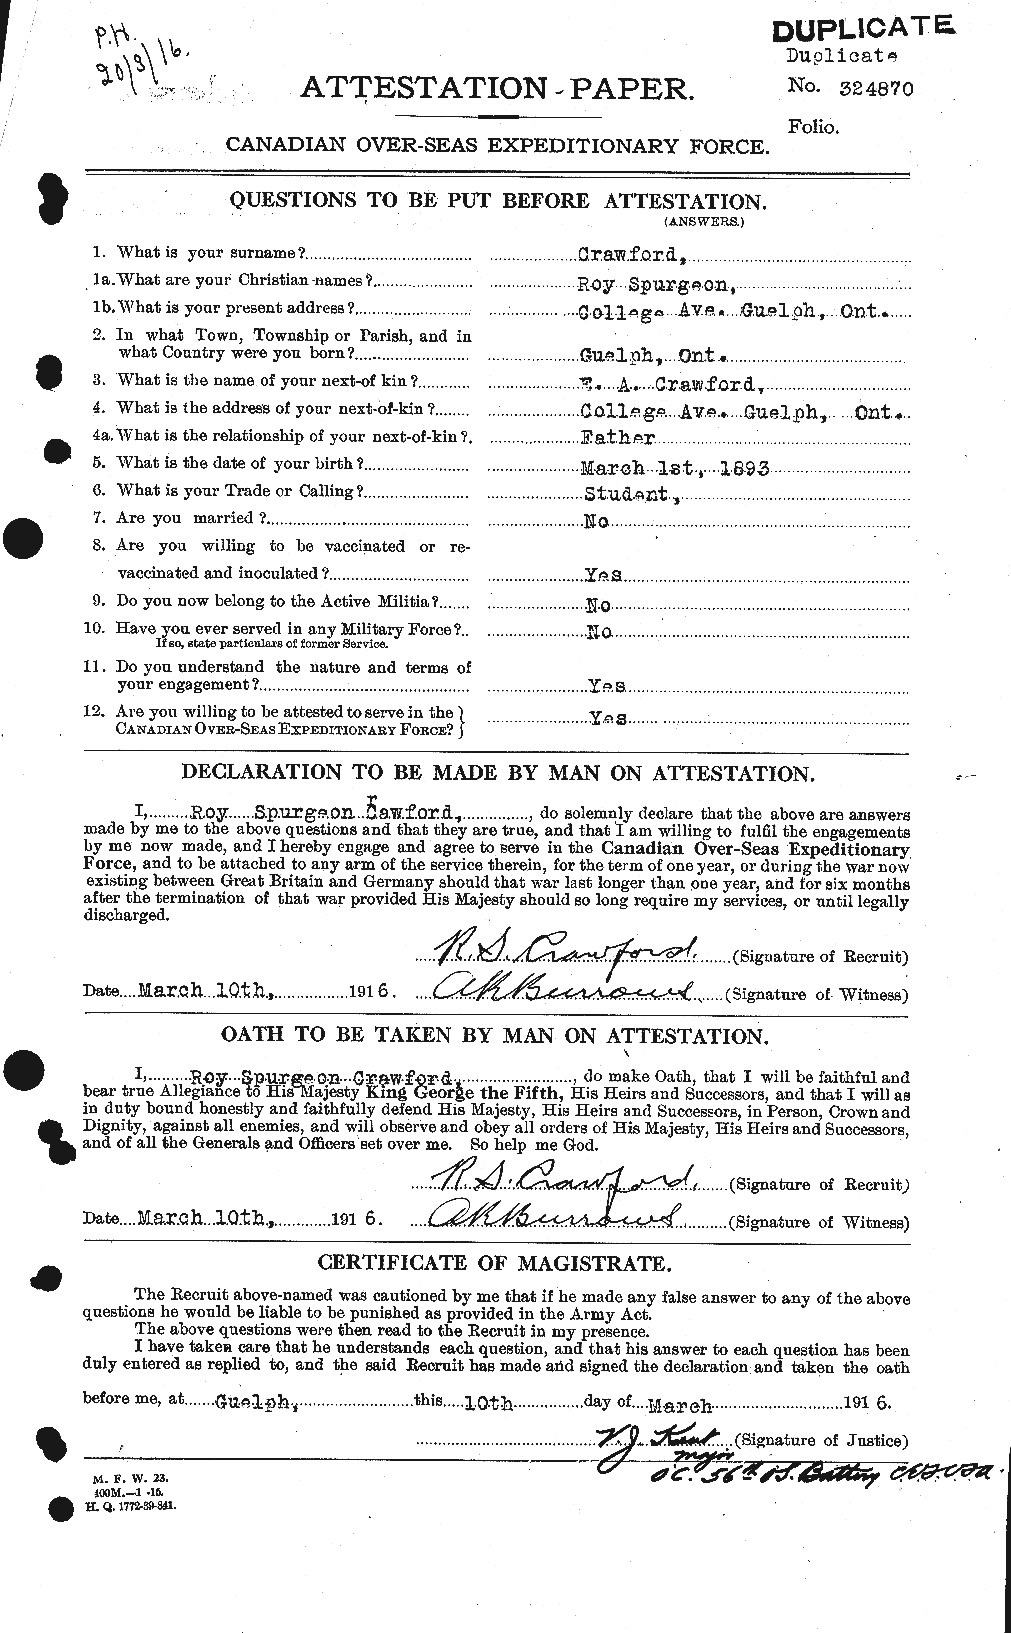 Personnel Records of the First World War - CEF 061385a